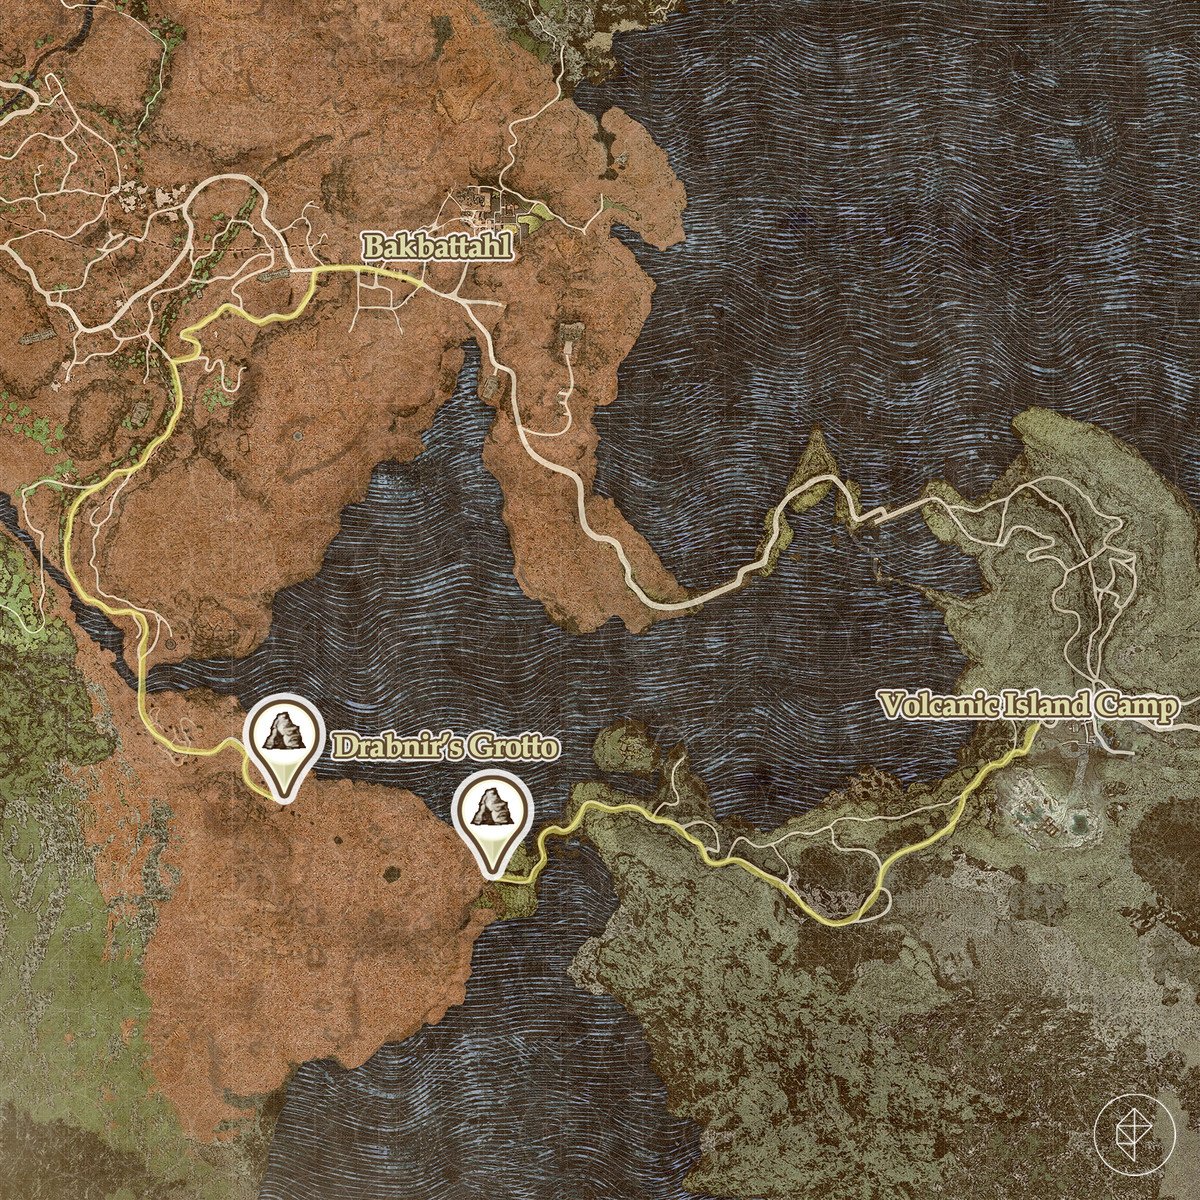 Dragon's Dogma 2 map with a return route from Bakbattahl to the volcanic island of Agamen